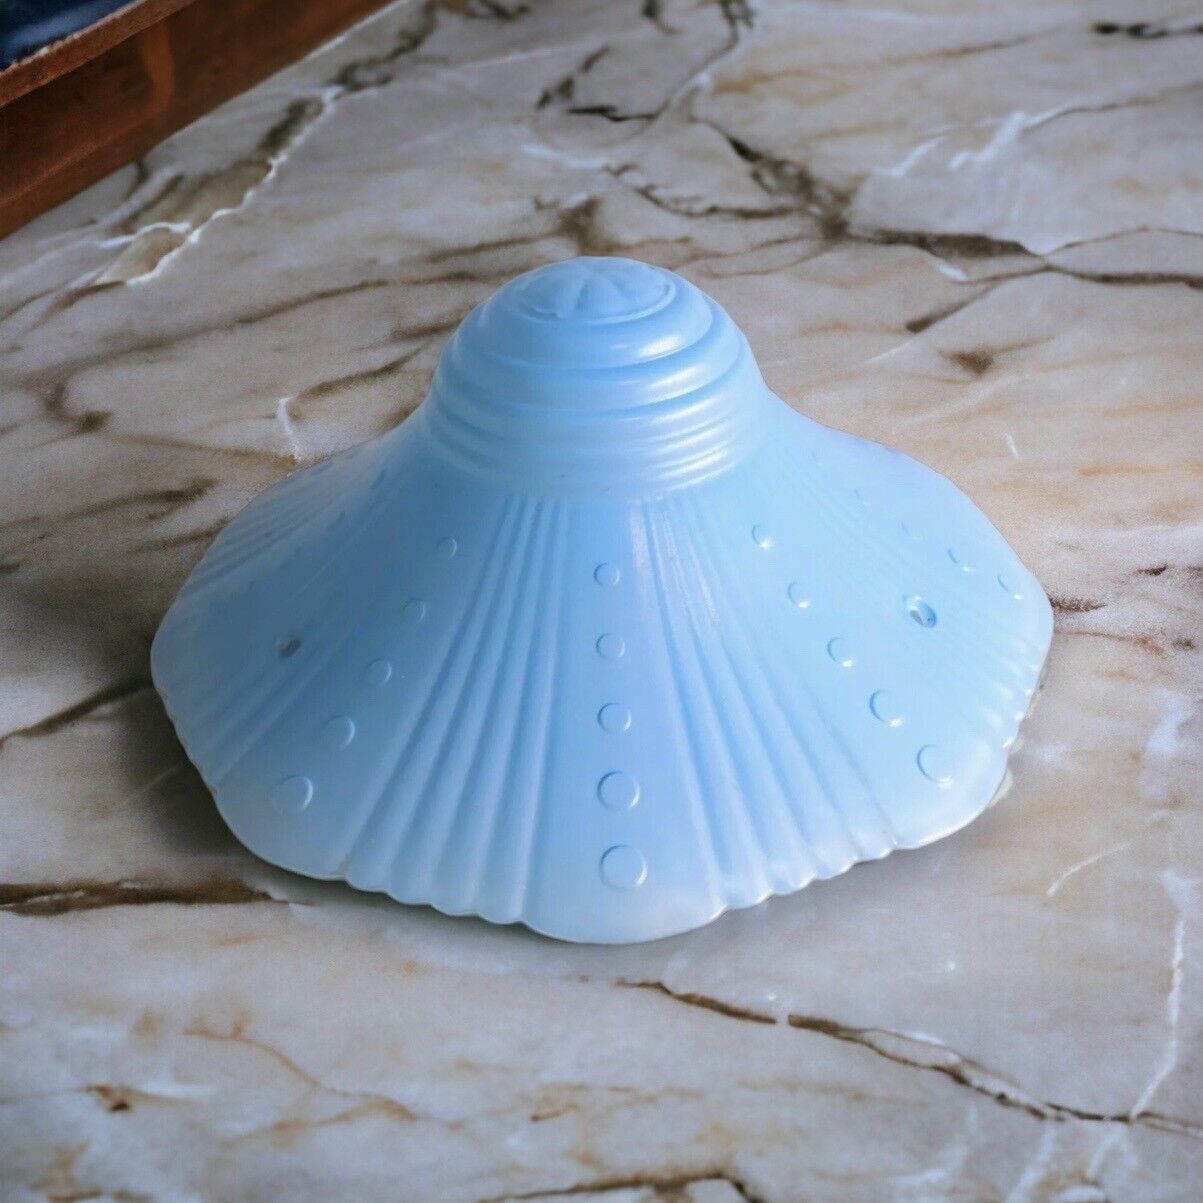 Vintage Art Deco Glass Ceiling Light Lamp Shade Bubbles and Fan Robins Egg Blue